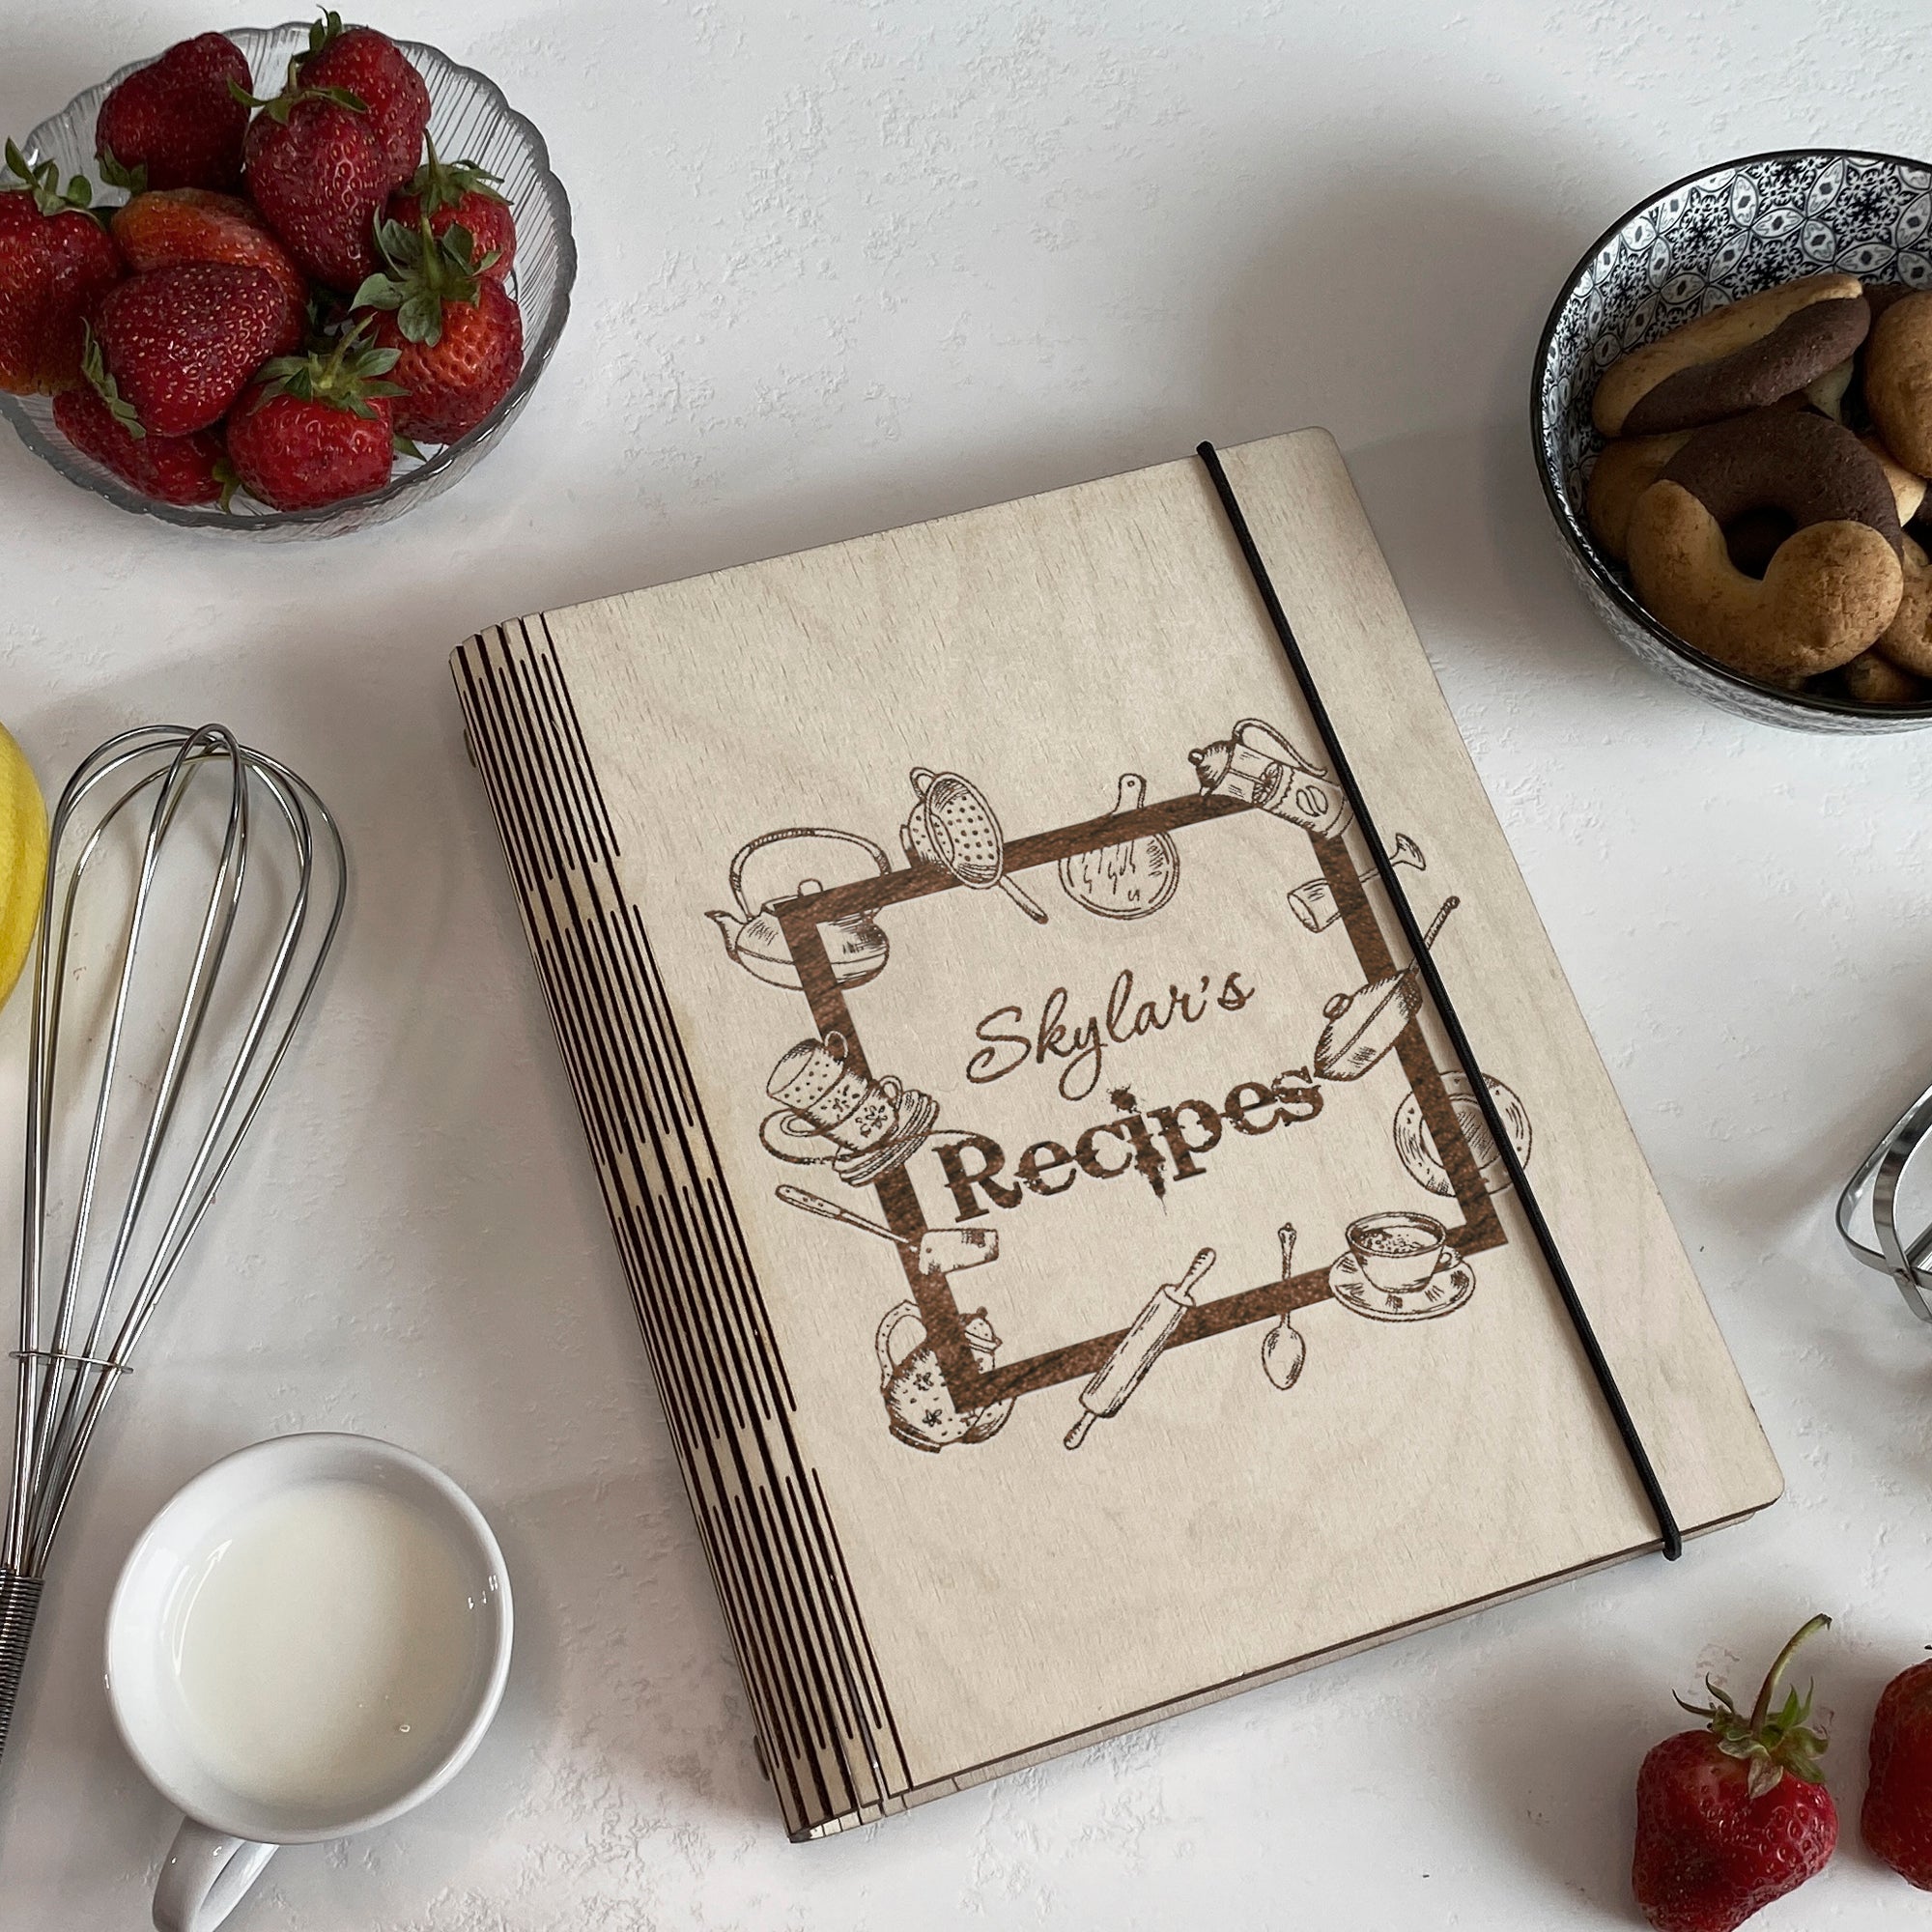 Personalized Wooden Recipe Book Free custom engraving